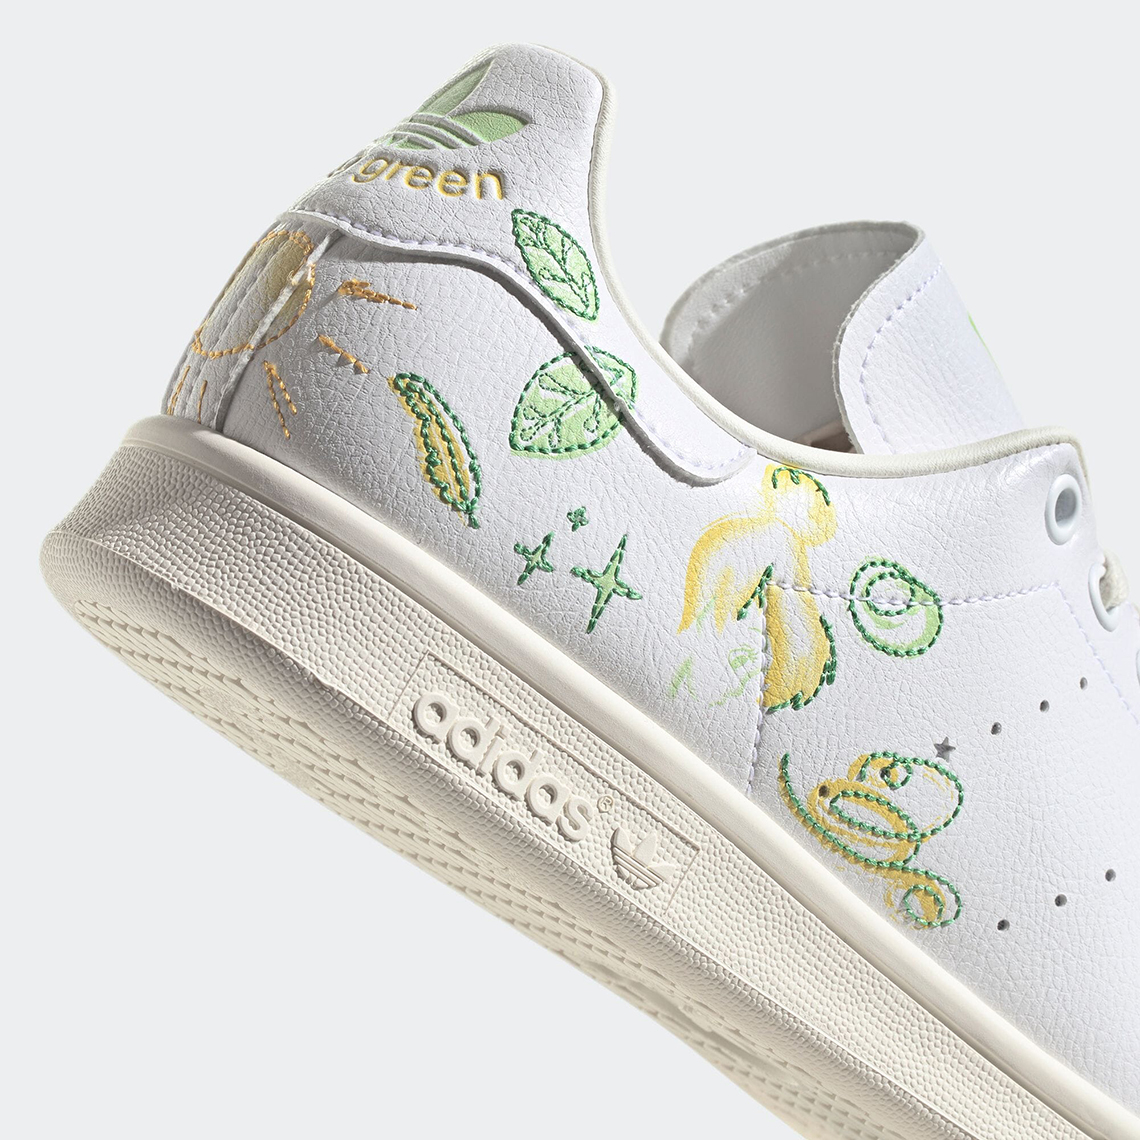 adidas Stan Smith Disney Duo Character Pack | SneakerNews.com عمل مطوية